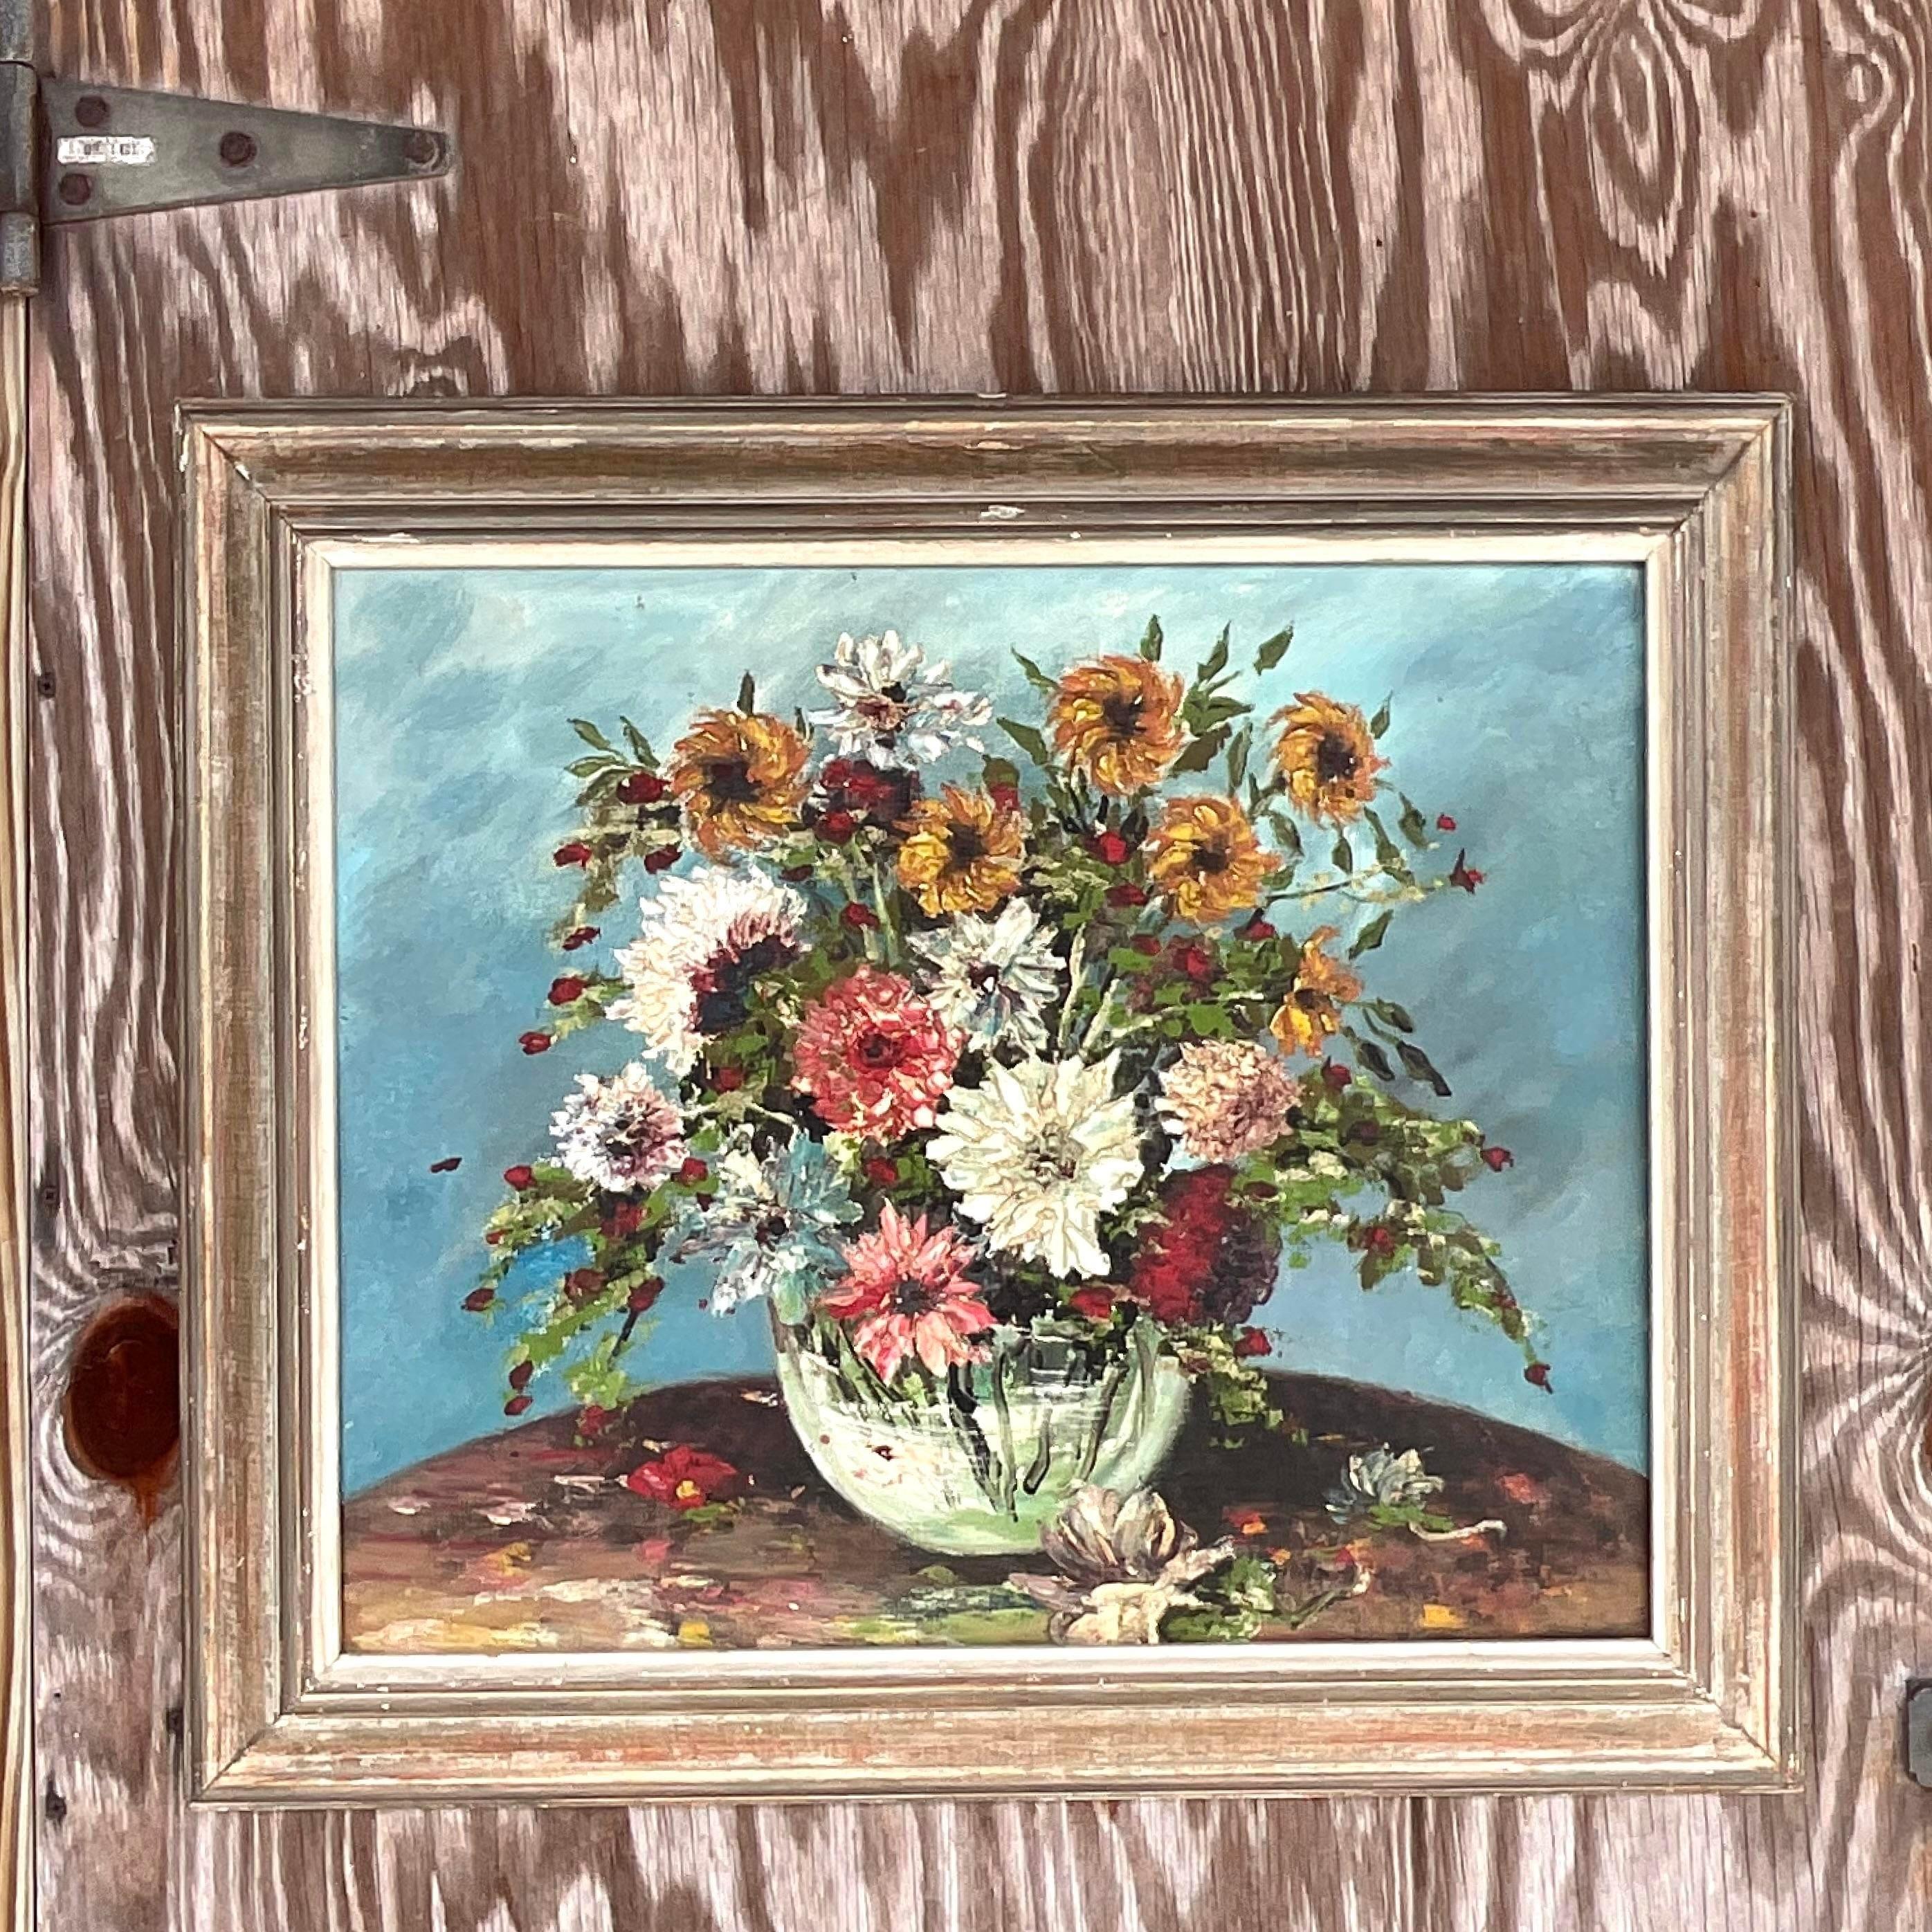 A fantastic vintage Boho original oil on canvas. A chic floral composition in deep muted colors. Signed by the artist and framed in a cerused oak frame. Acquired from a Palm Beach estate. 